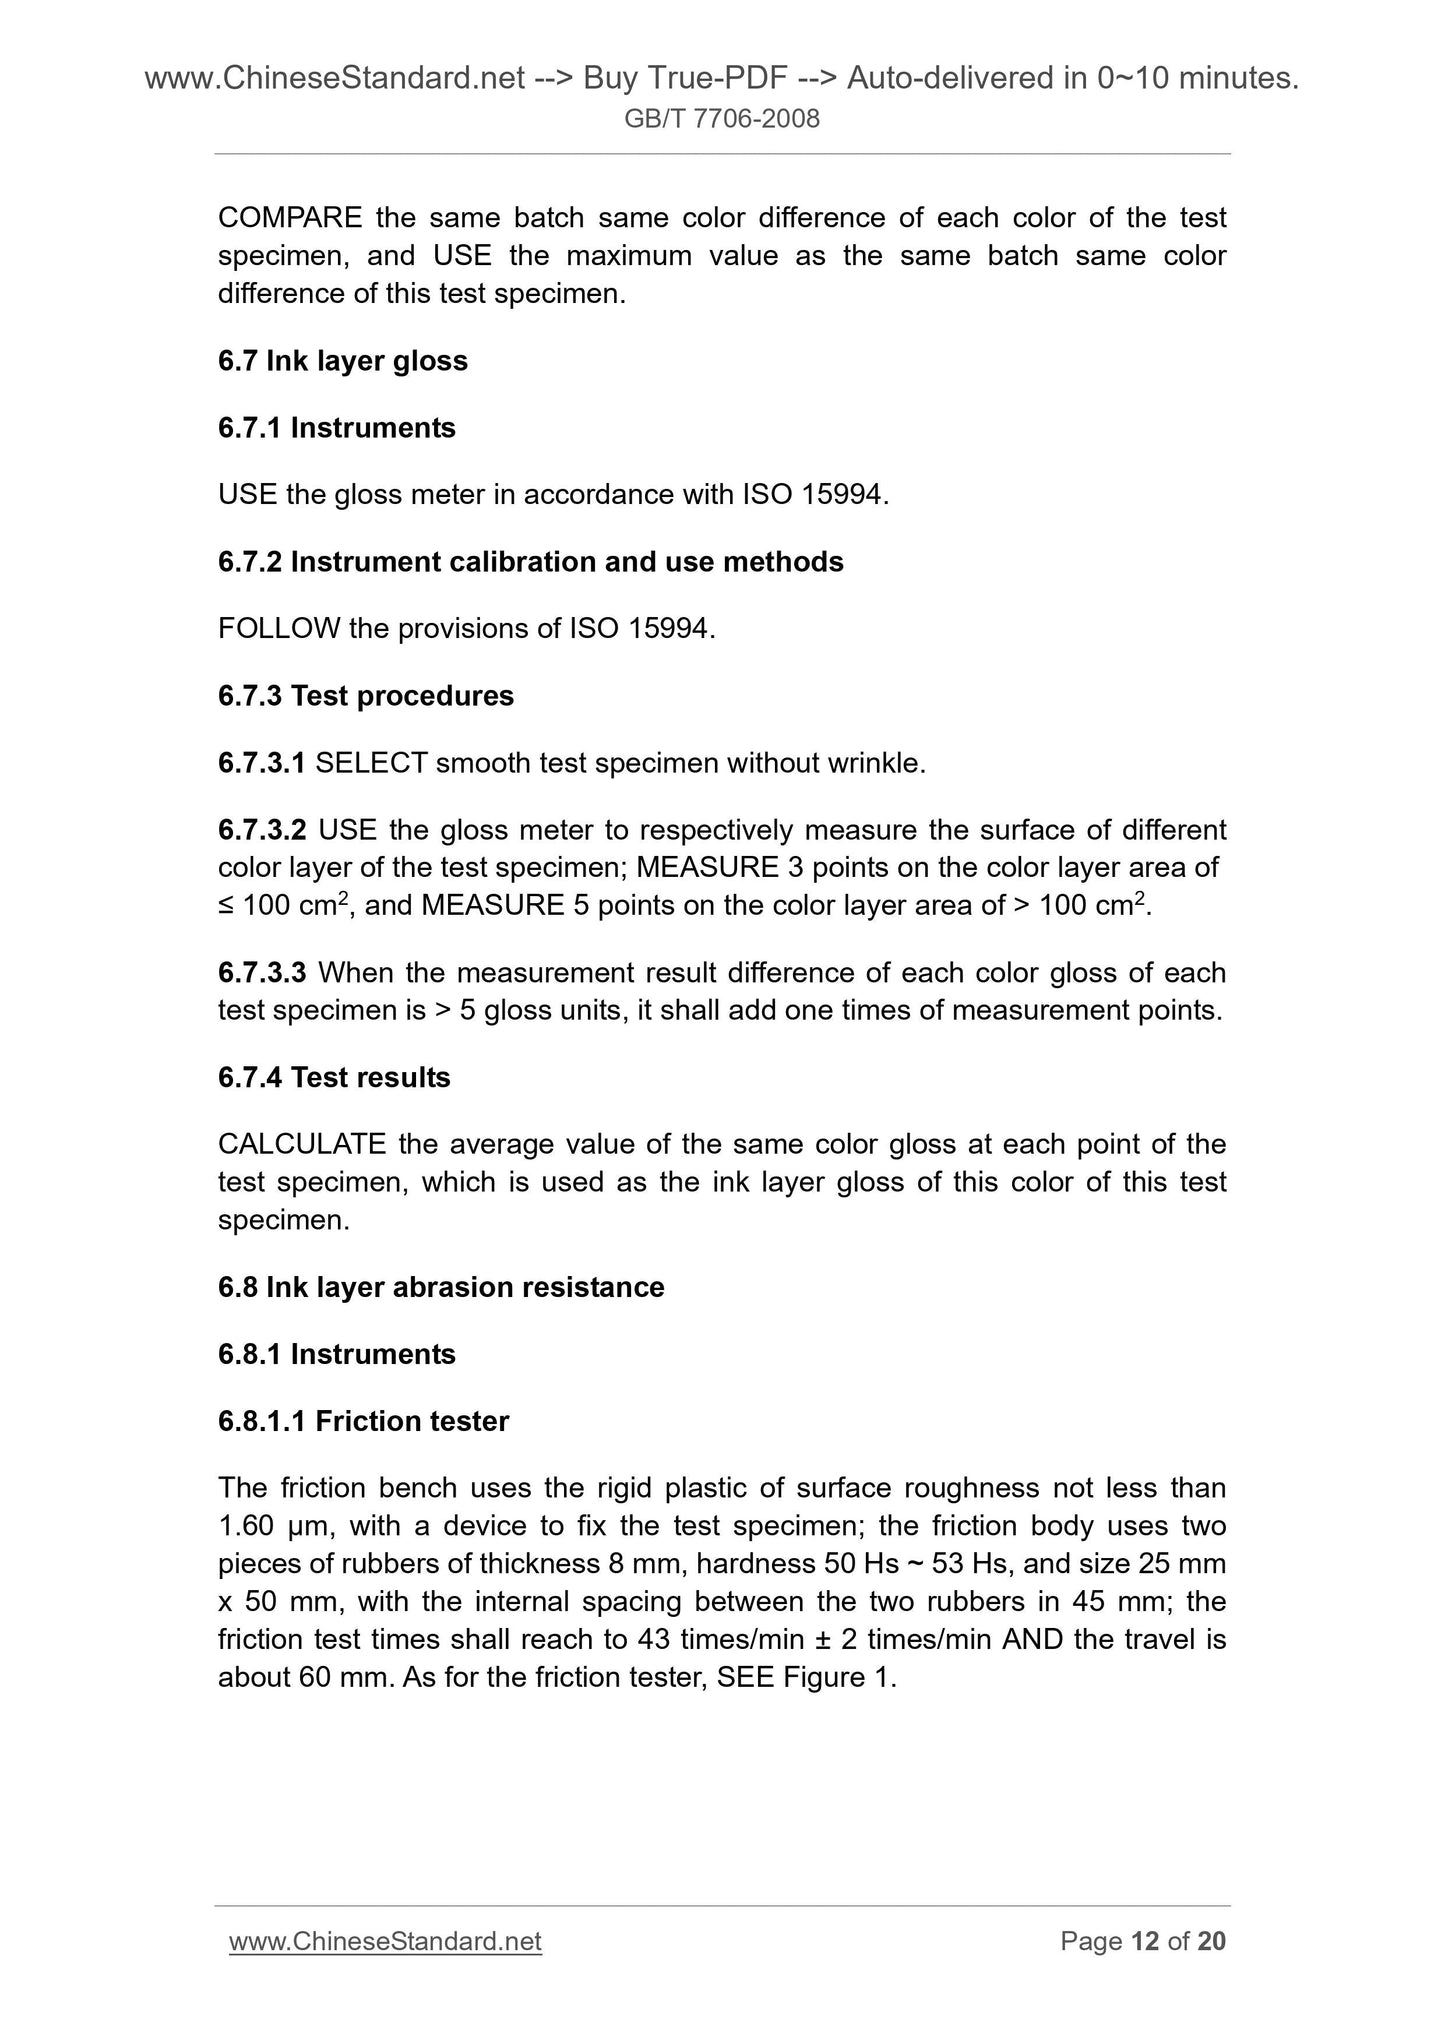 GB/T 7706-2008 Page 7